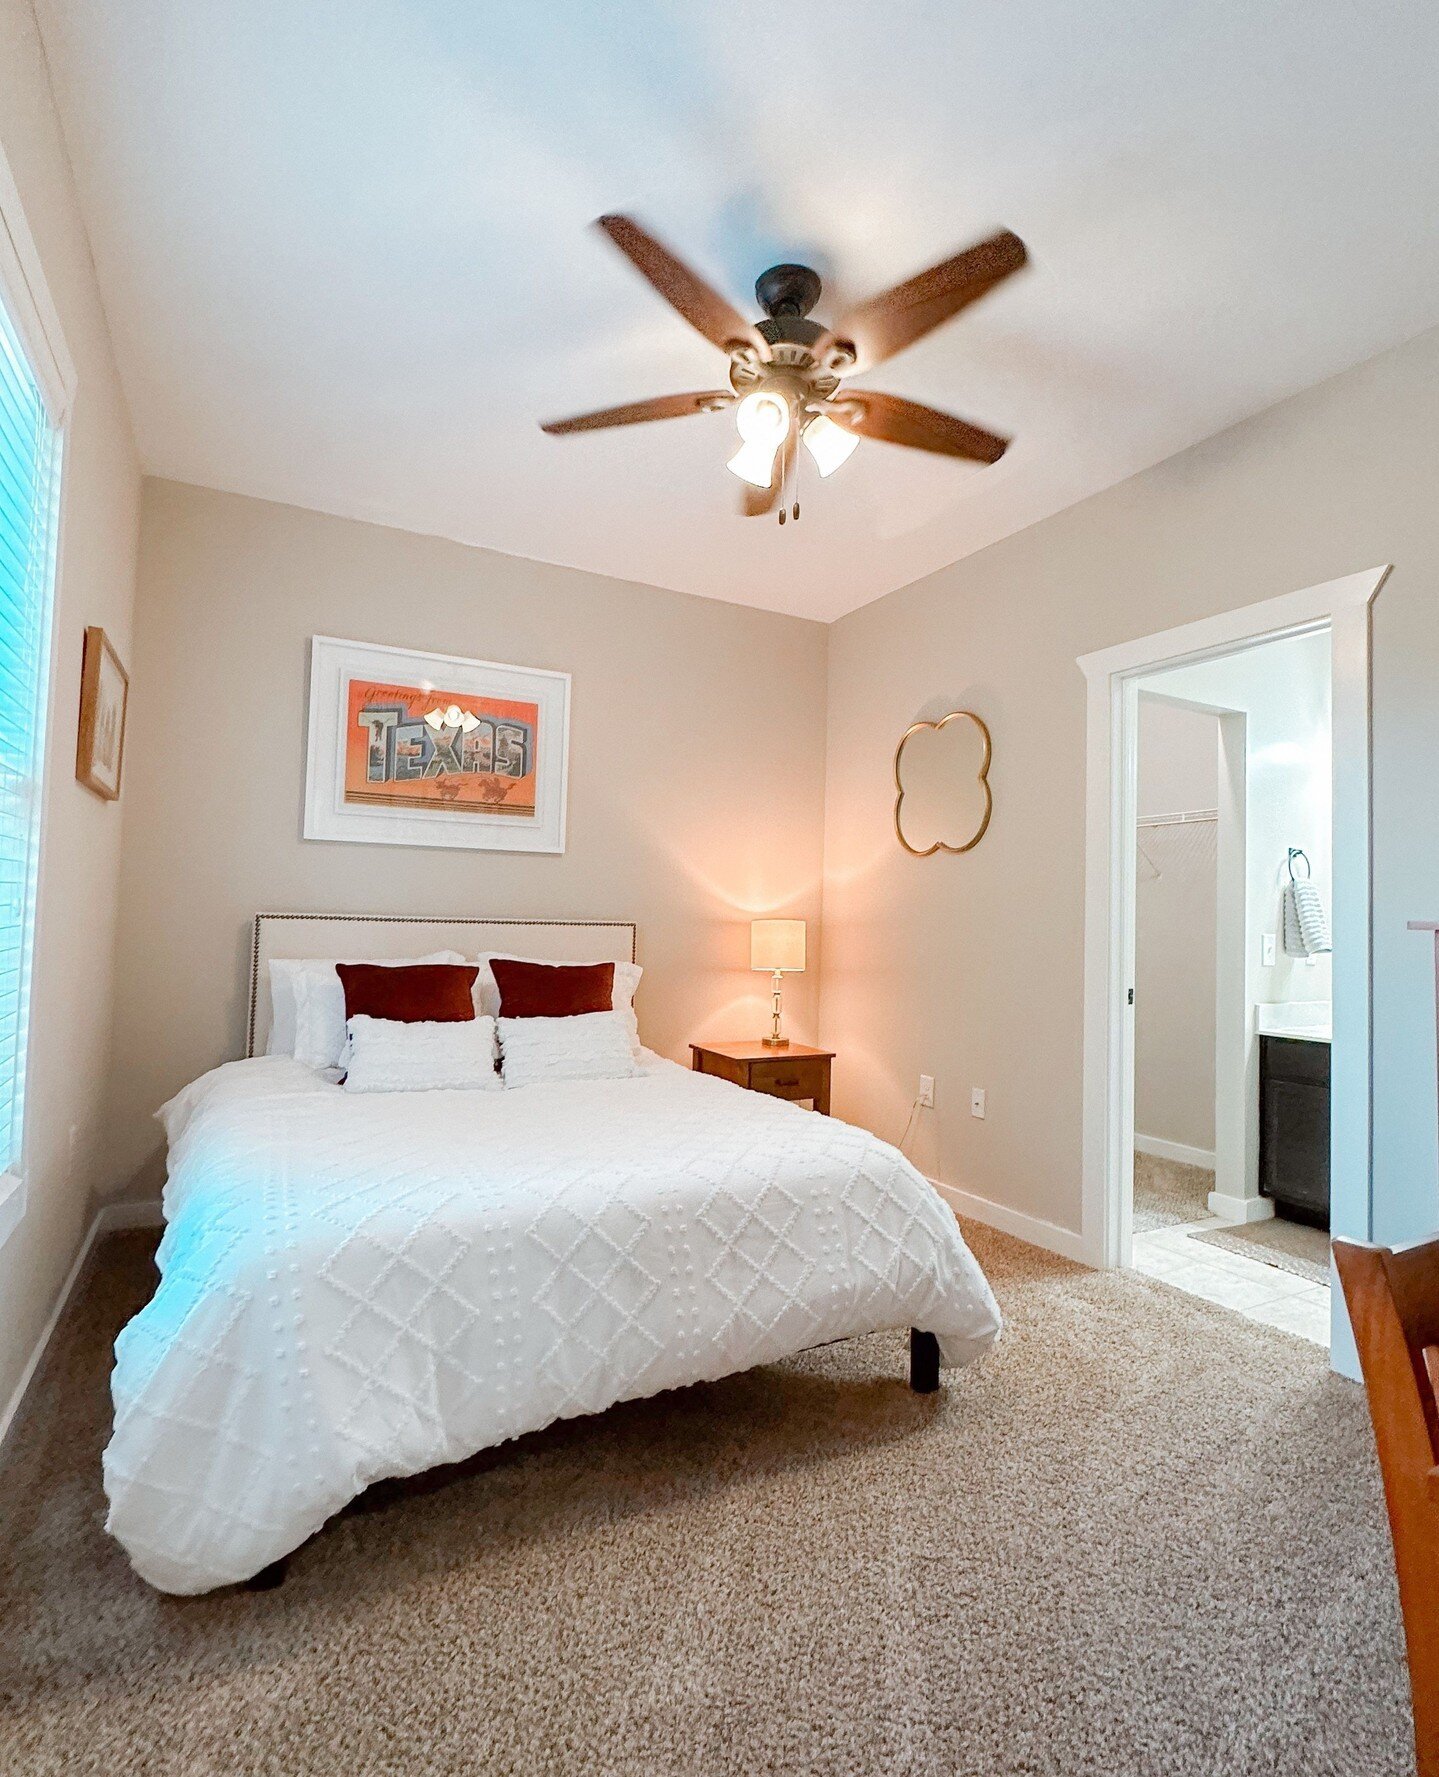 Our spacious units offer the ultimate living environment for you and your friends! Schedule a tour today to make this comfortable space your own! 💤